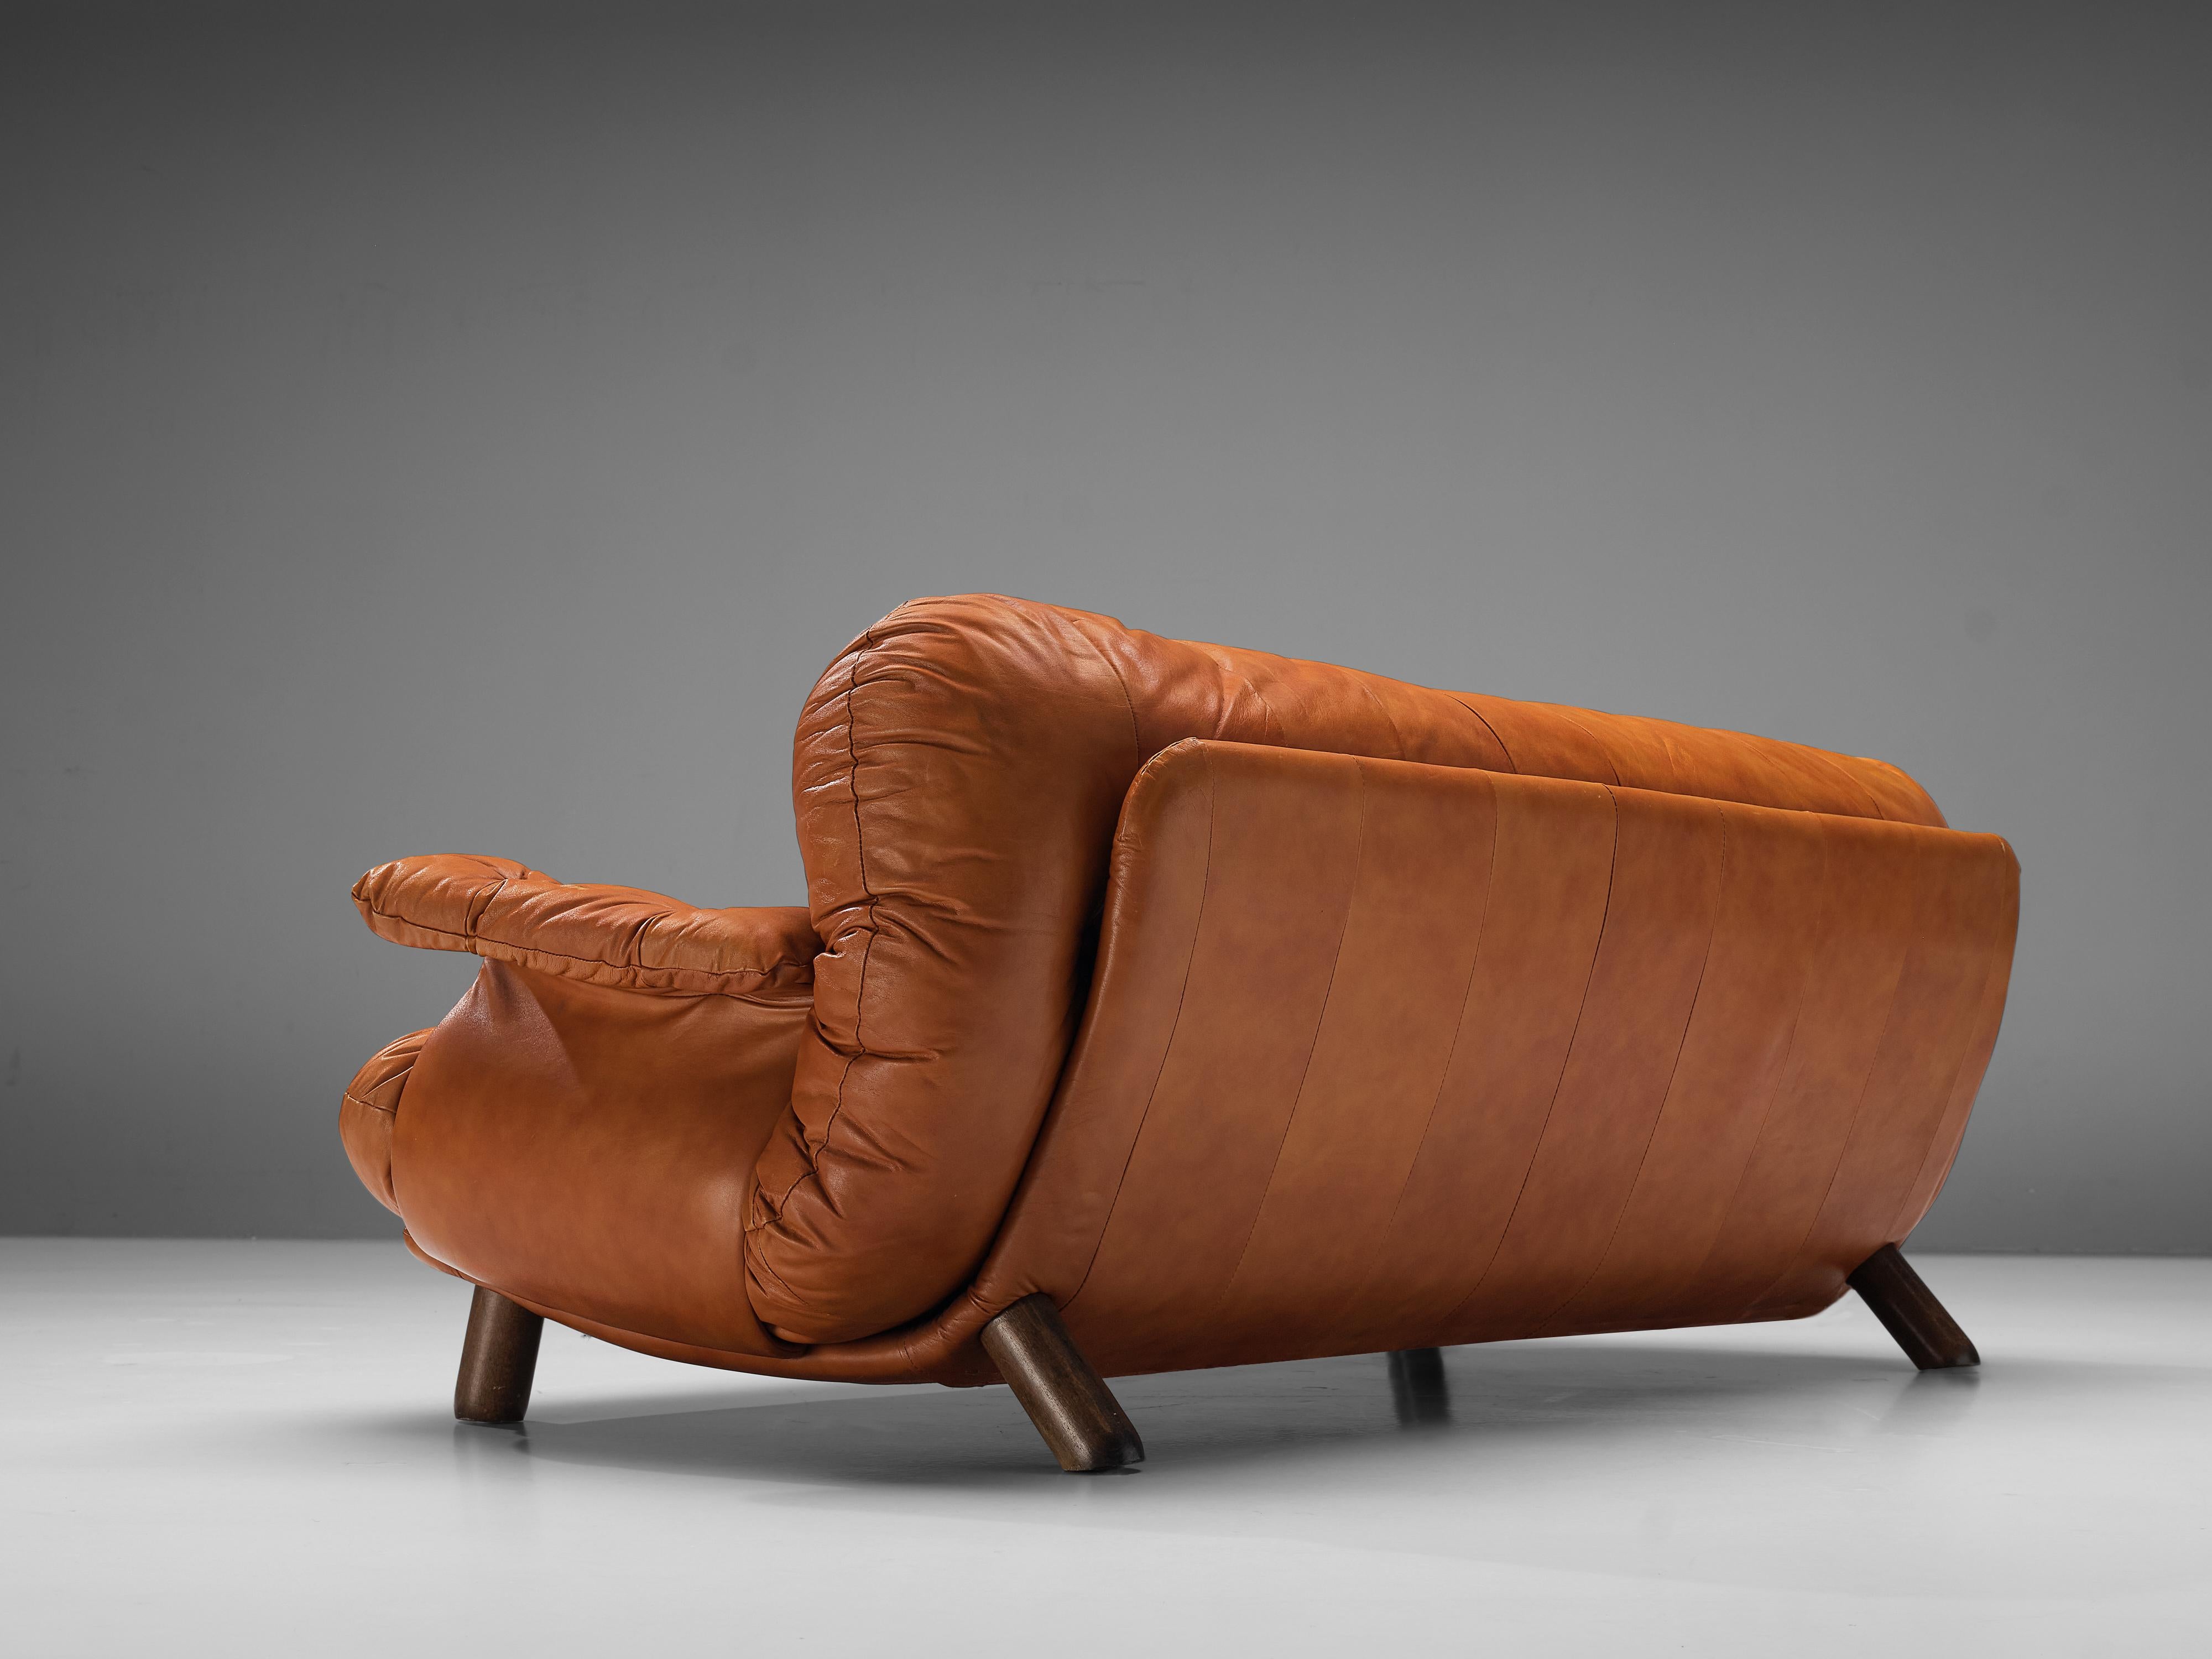 Late 20th Century E. Cobianchi Sofa in Tufted Cognac Leather